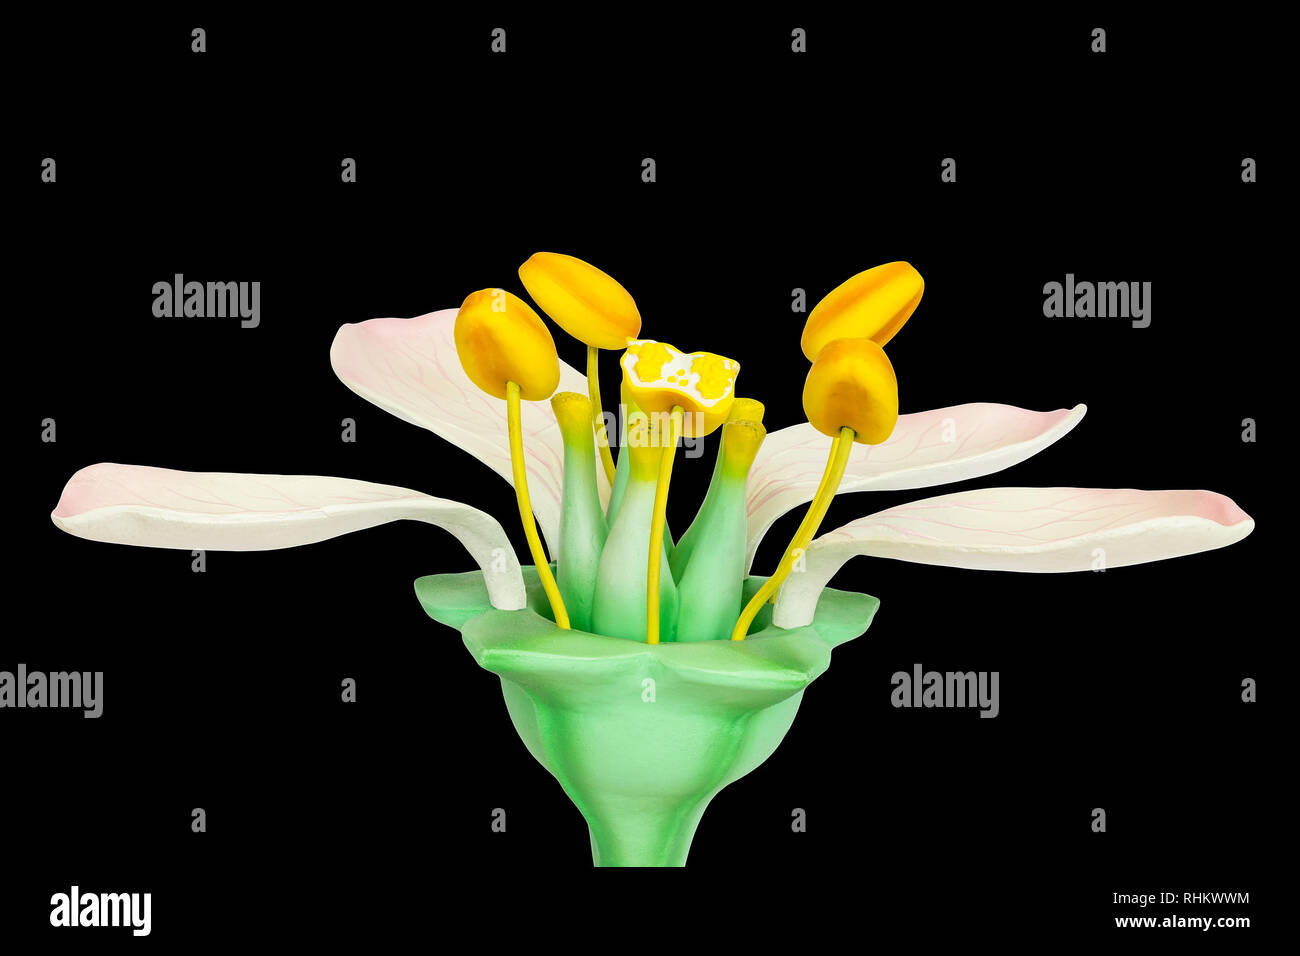 Model of flower with stamens and pistils isolated on black background Stock Photo